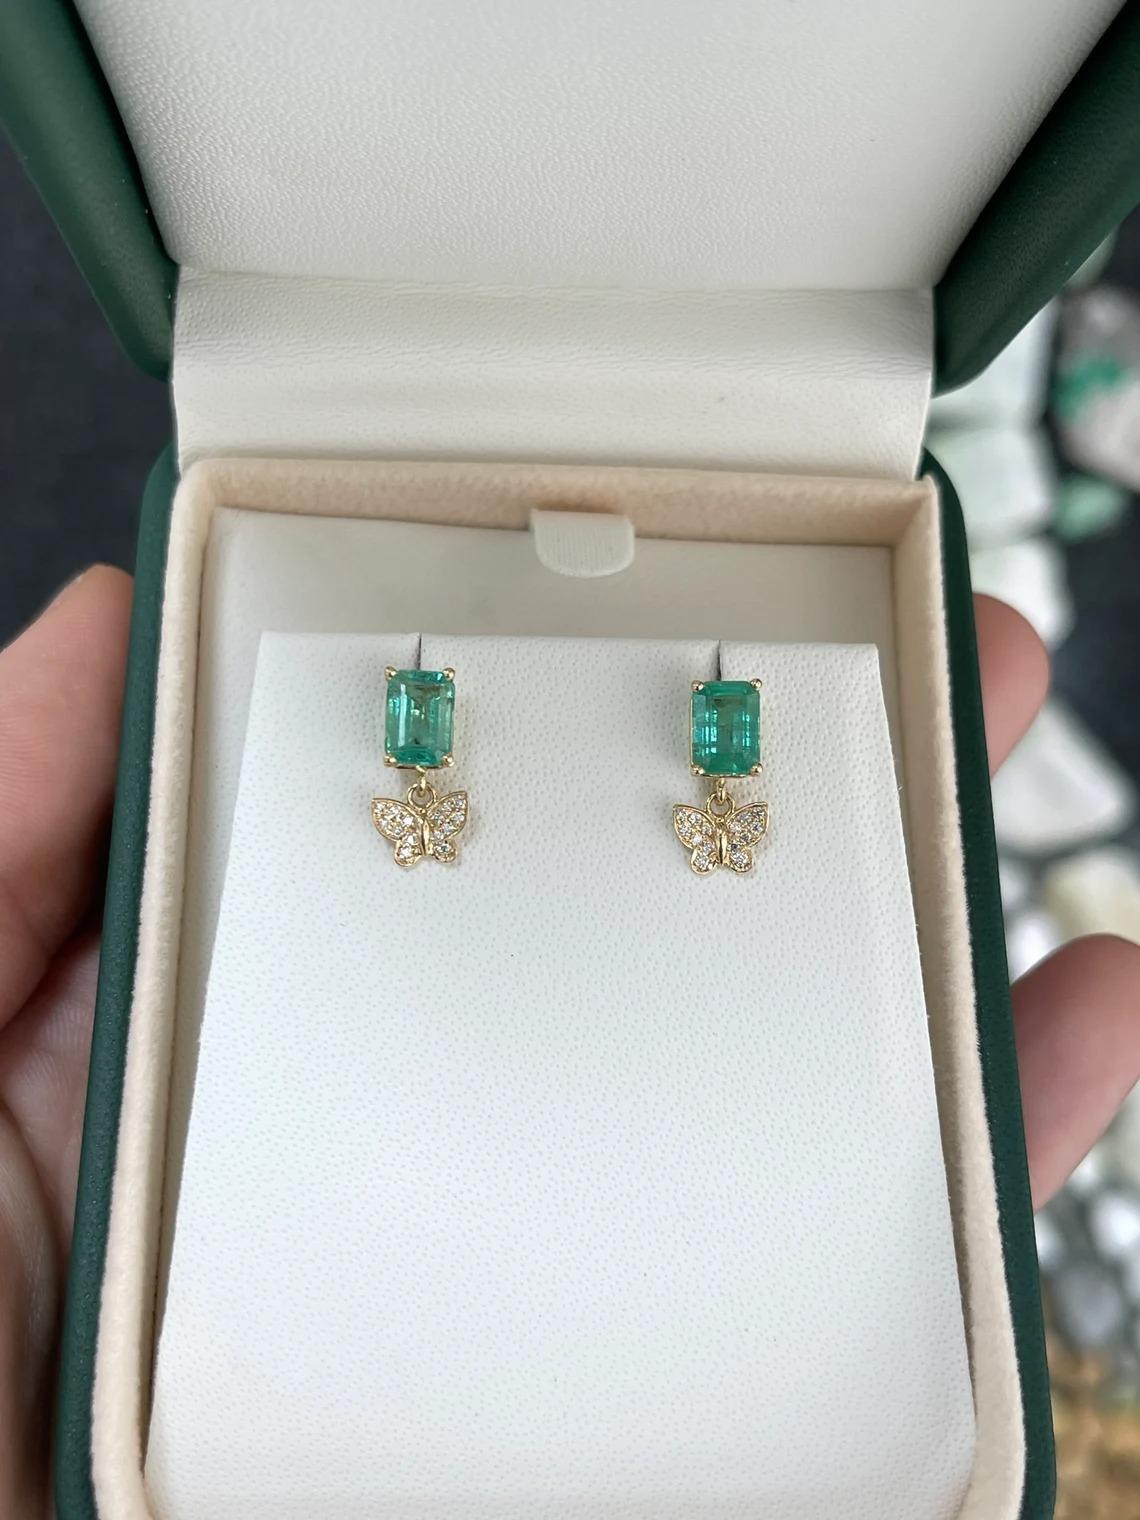 These exquisite dangle earrings feature stunning emerald-cut emeralds, elegantly set in a north-to-south orientation. The emeralds exhibit a mesmerizing medium-dark green hue, with good luster and clarity. Adorned with delicate butterfly motifs of